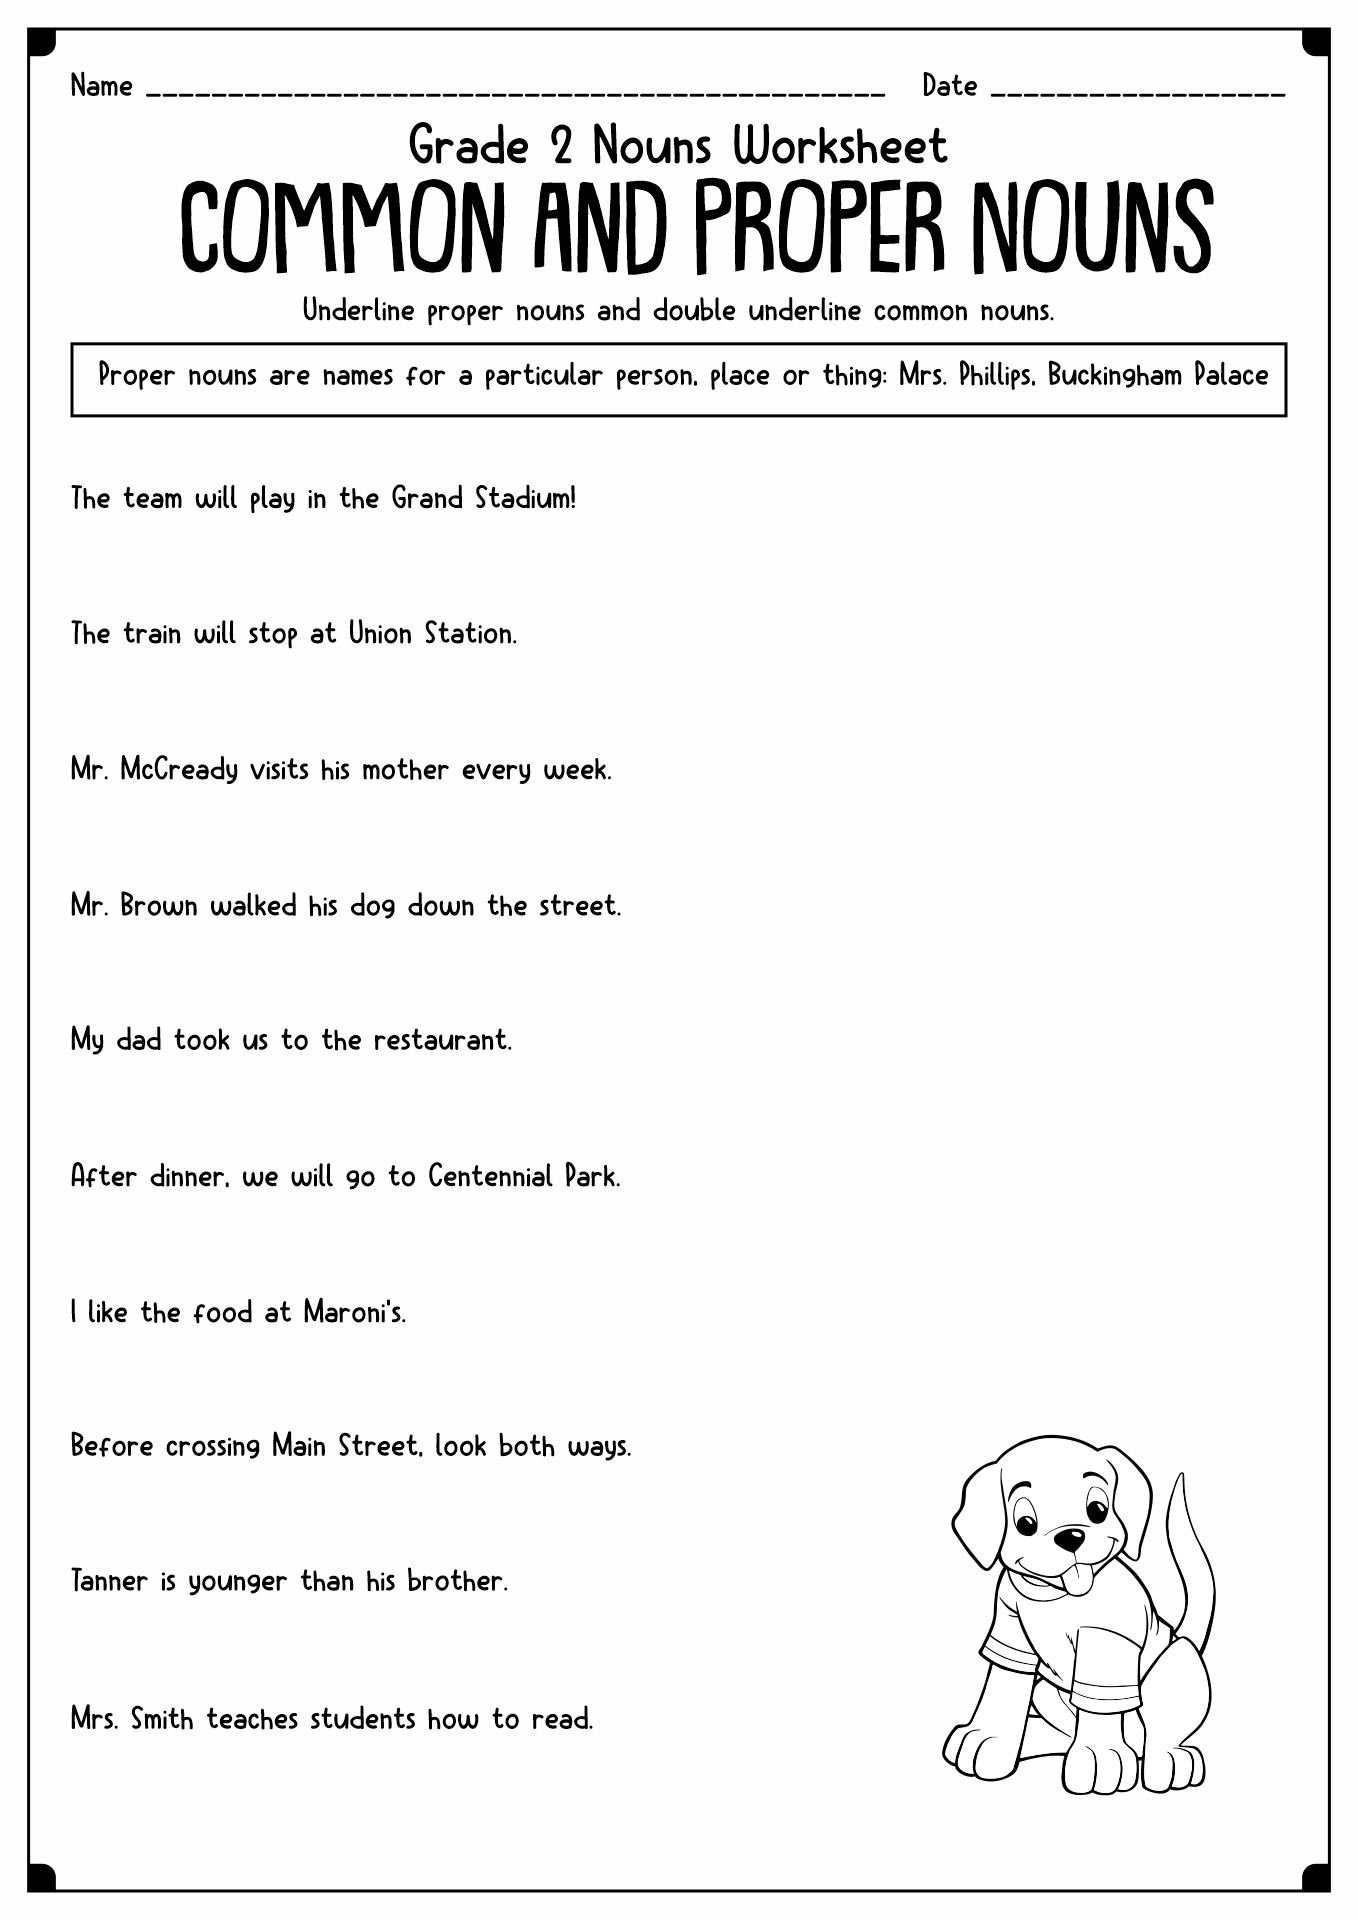 18 Best Images of Proper Noun Worksheets For First Grade - Common and